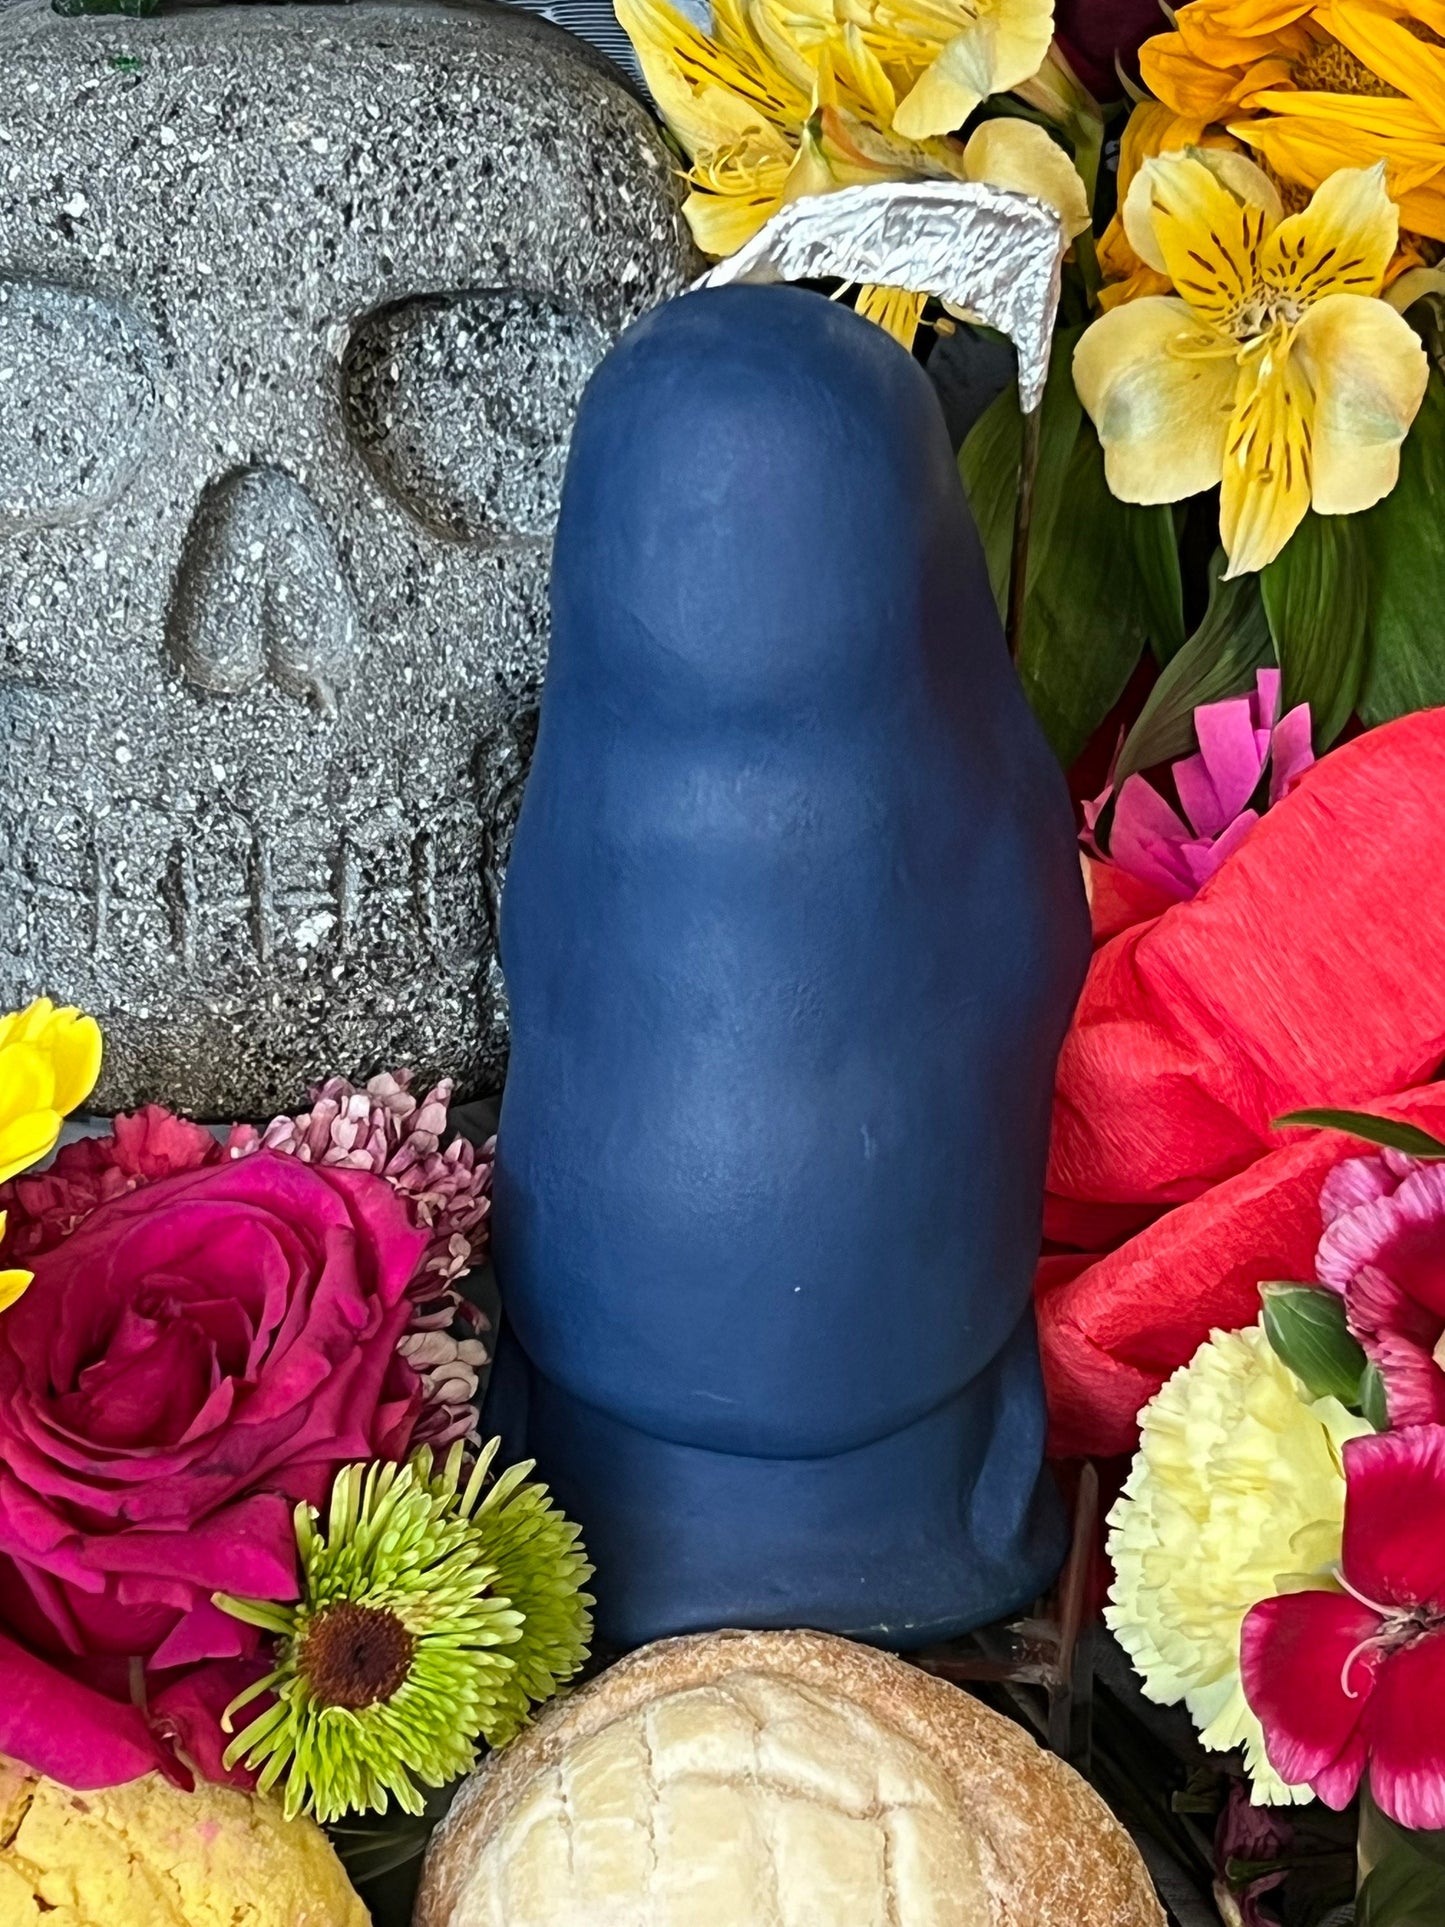 Santa Muerte Azul Statue + Blue + Mictecacihuatl + Mictlantecihuatl + Traditionally Handcrafted from Mexican Clay + One of a Kind